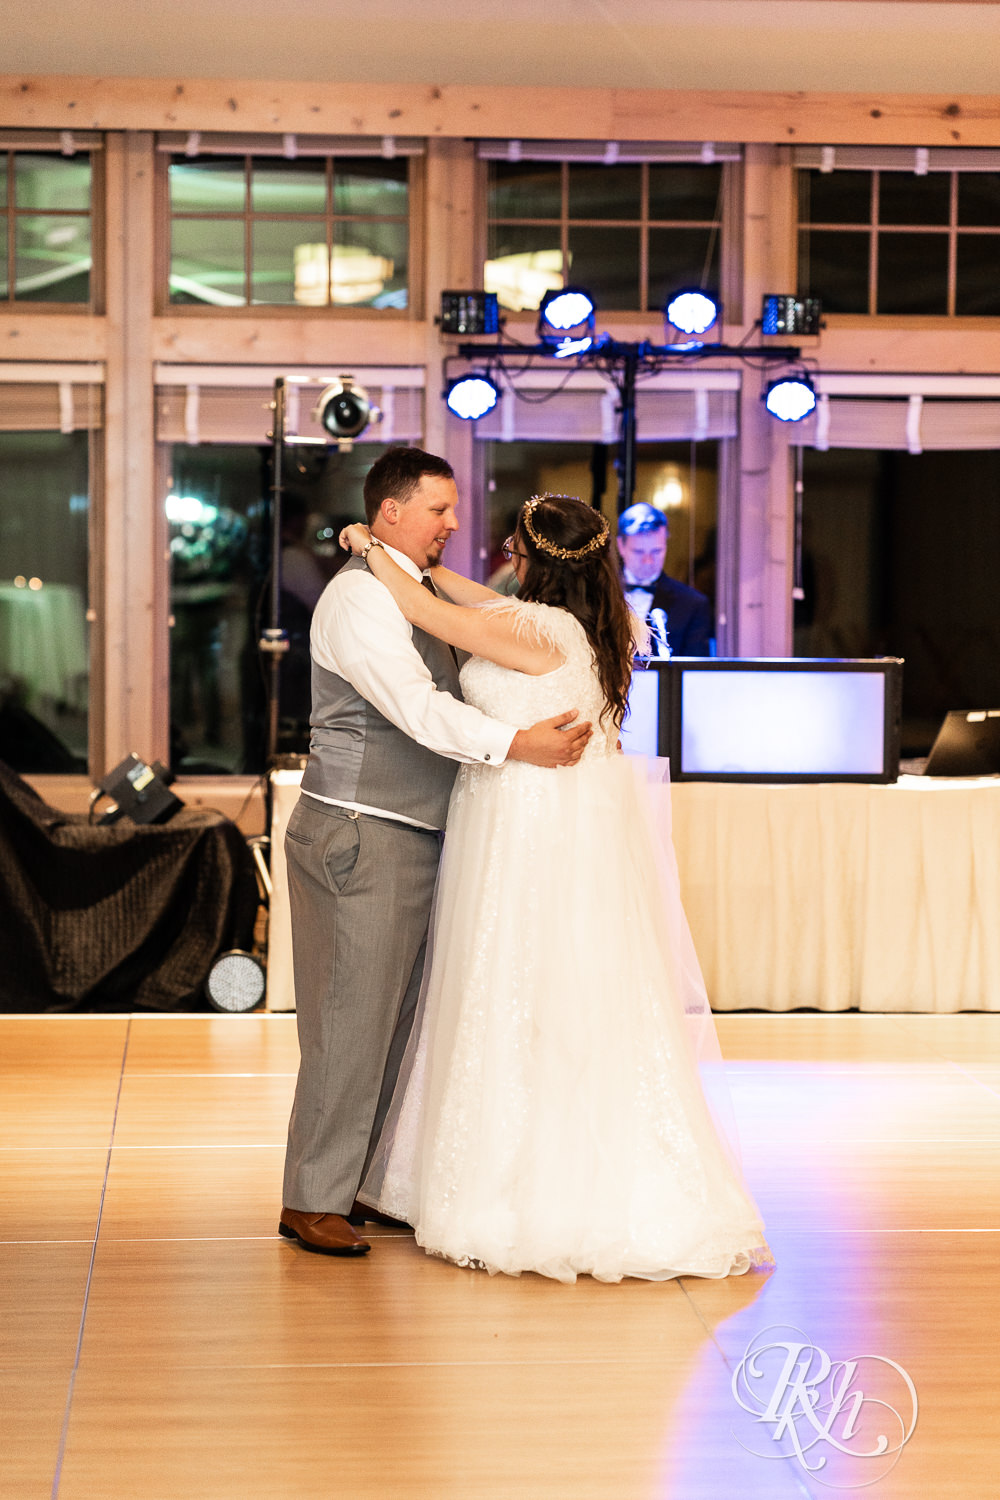 Bride and groom share first dance at Bunker Hills Event Center in Coon Rapids, Minnesota.